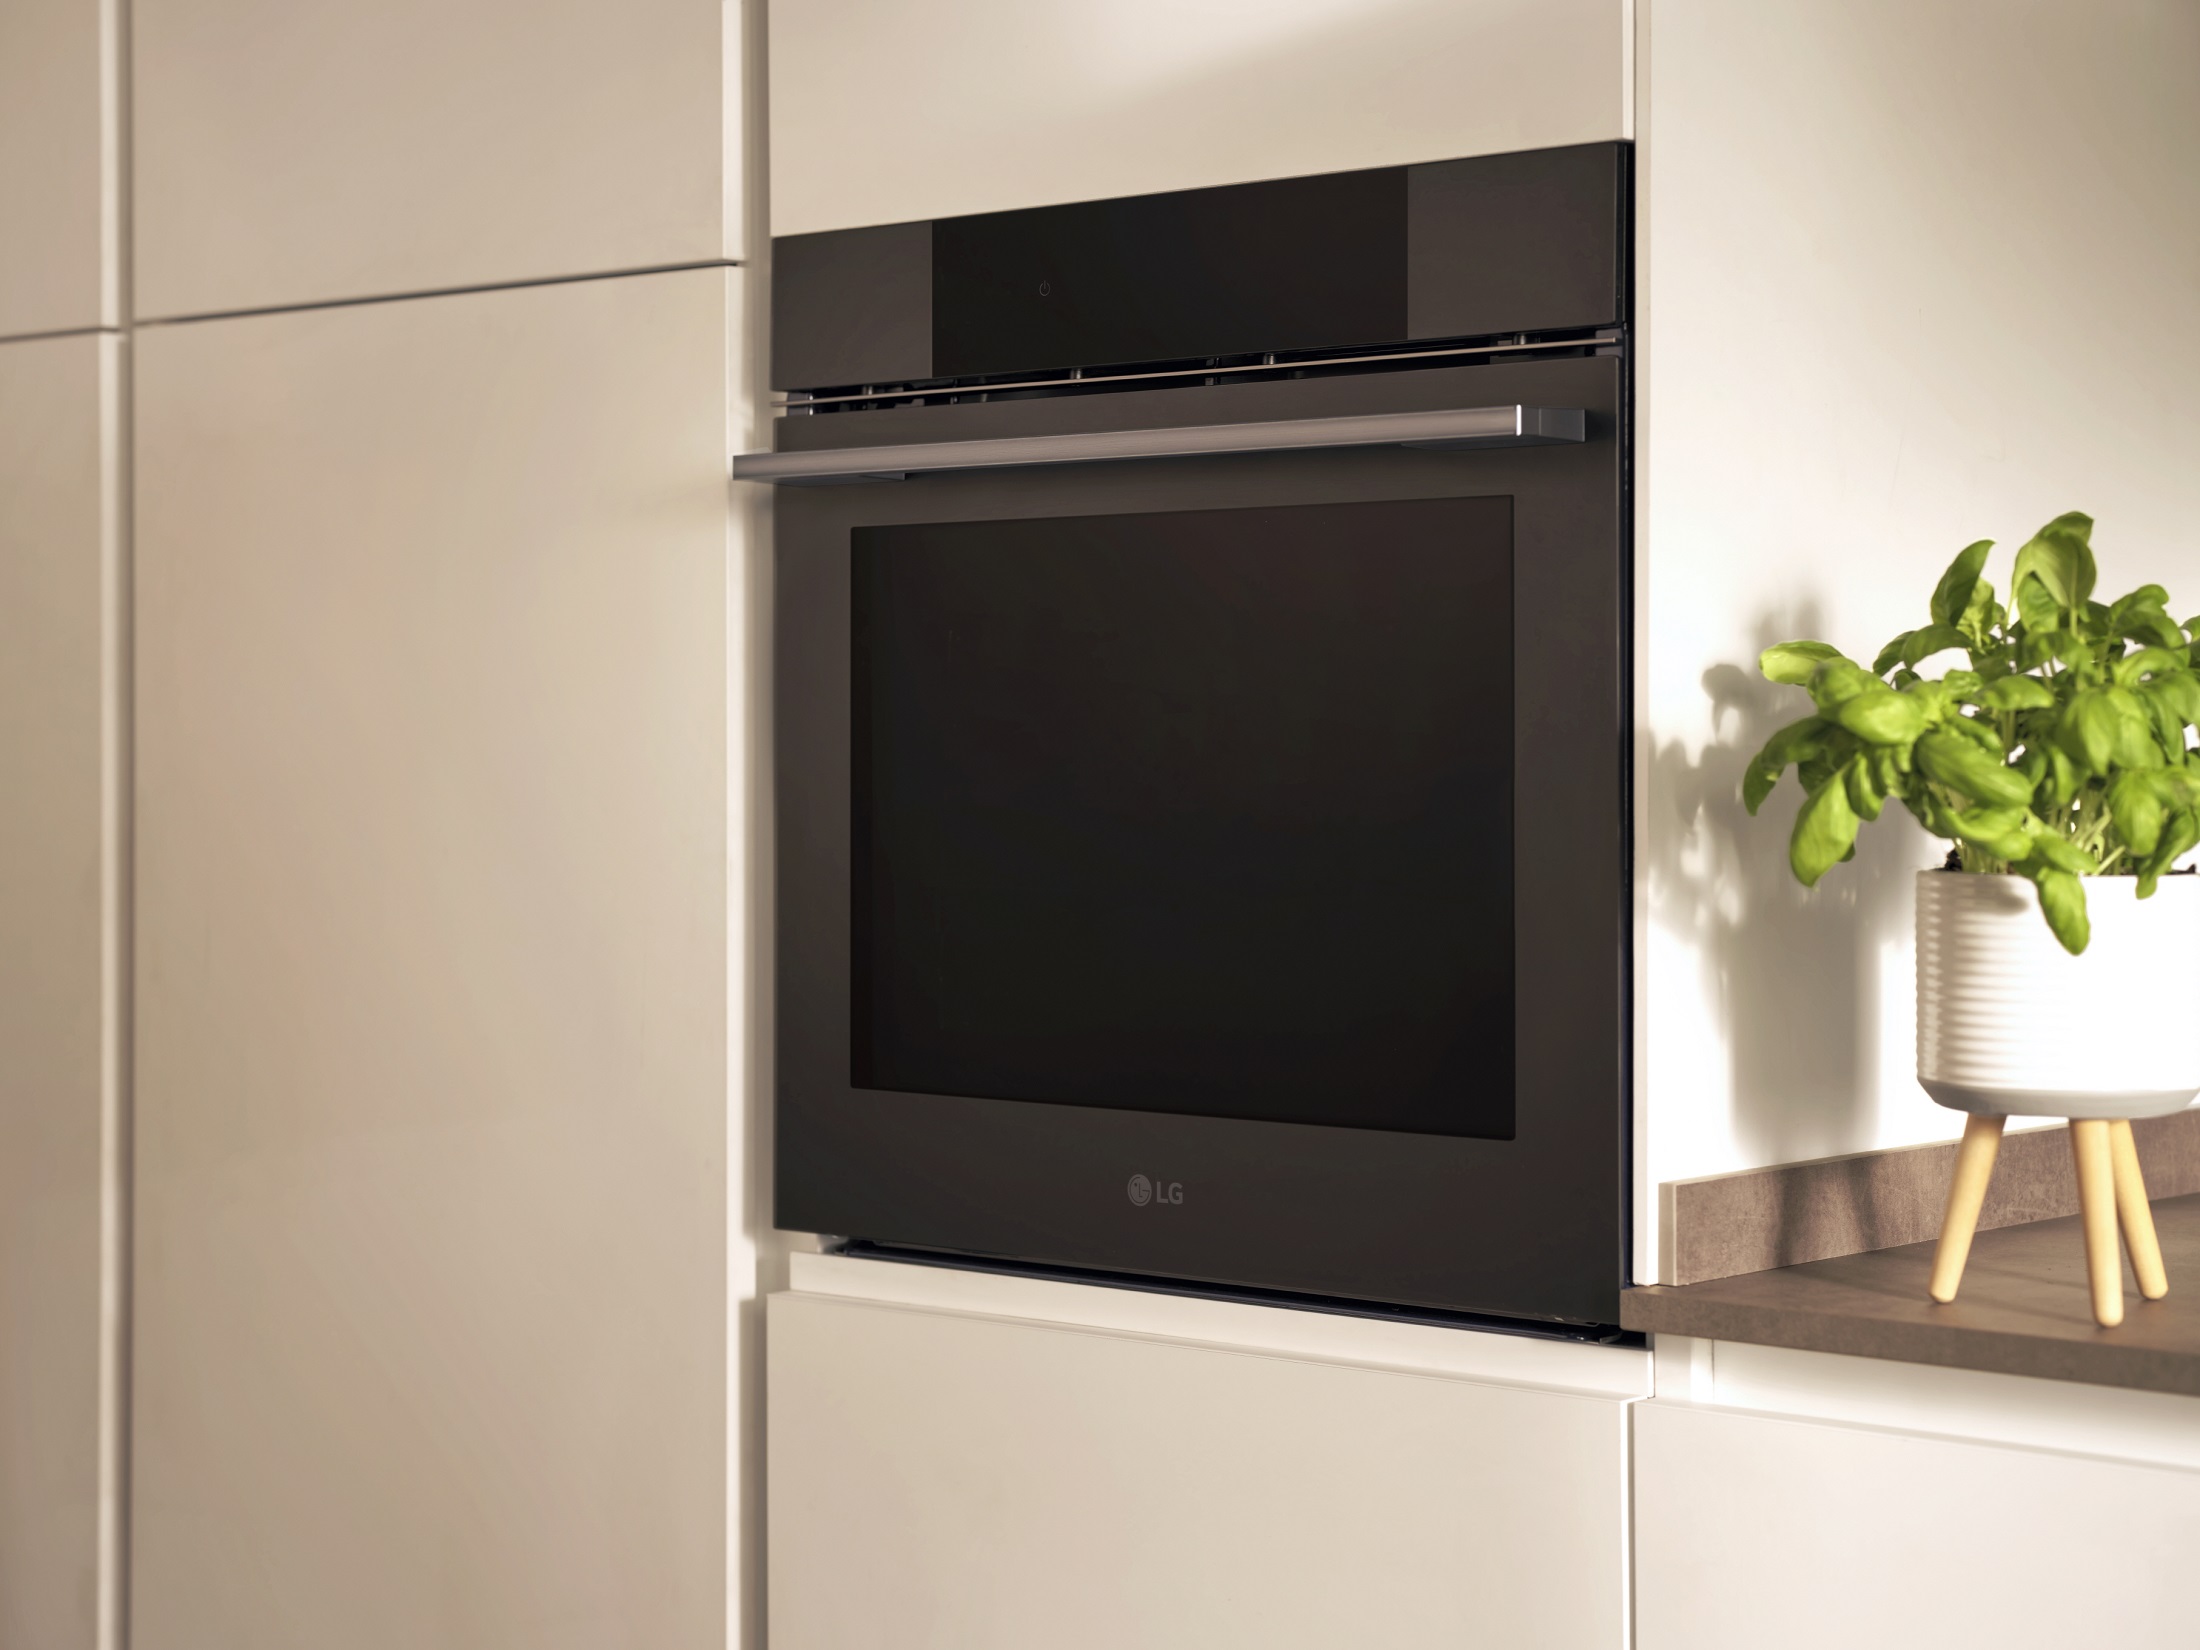 LG InstaView™ oven from the brand’s new built-in kitchen package allows users to easily see inside without having to open the door